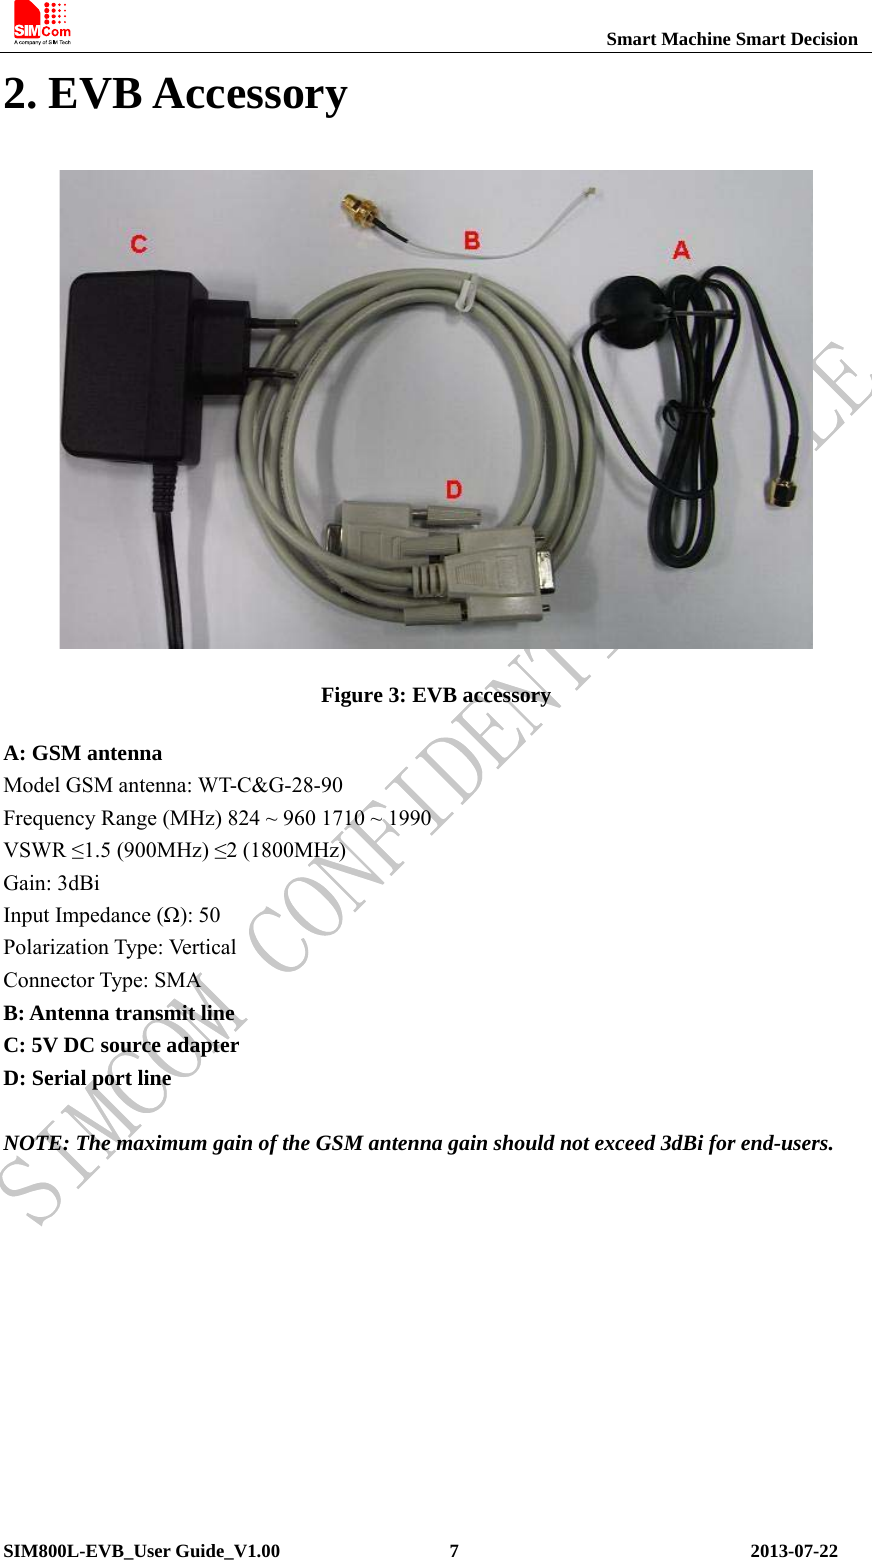                                                          Smart Machine Smart Decision SIM800L-EVB_User Guide_V1.00                  7                               2013-07-22 2. EVB Accessory  Figure 3: EVB accessory A: GSM antenna Model GSM antenna: WT-C&amp;G-28-90   Frequency Range (MHz) 824 ~ 960 1710 ~ 1990   VSWR ≤1.5 (900MHz) ≤2 (1800MHz)   Gain: 3dBi Input Impedance (Ω): 50   Polarization Type: Vertical   Connector Type: SMA B: Antenna transmit line C: 5V DC source adapter D: Serial port line  NOTE: The maximum gain of the GSM antenna gain should not exceed 3dBi for end-users. 